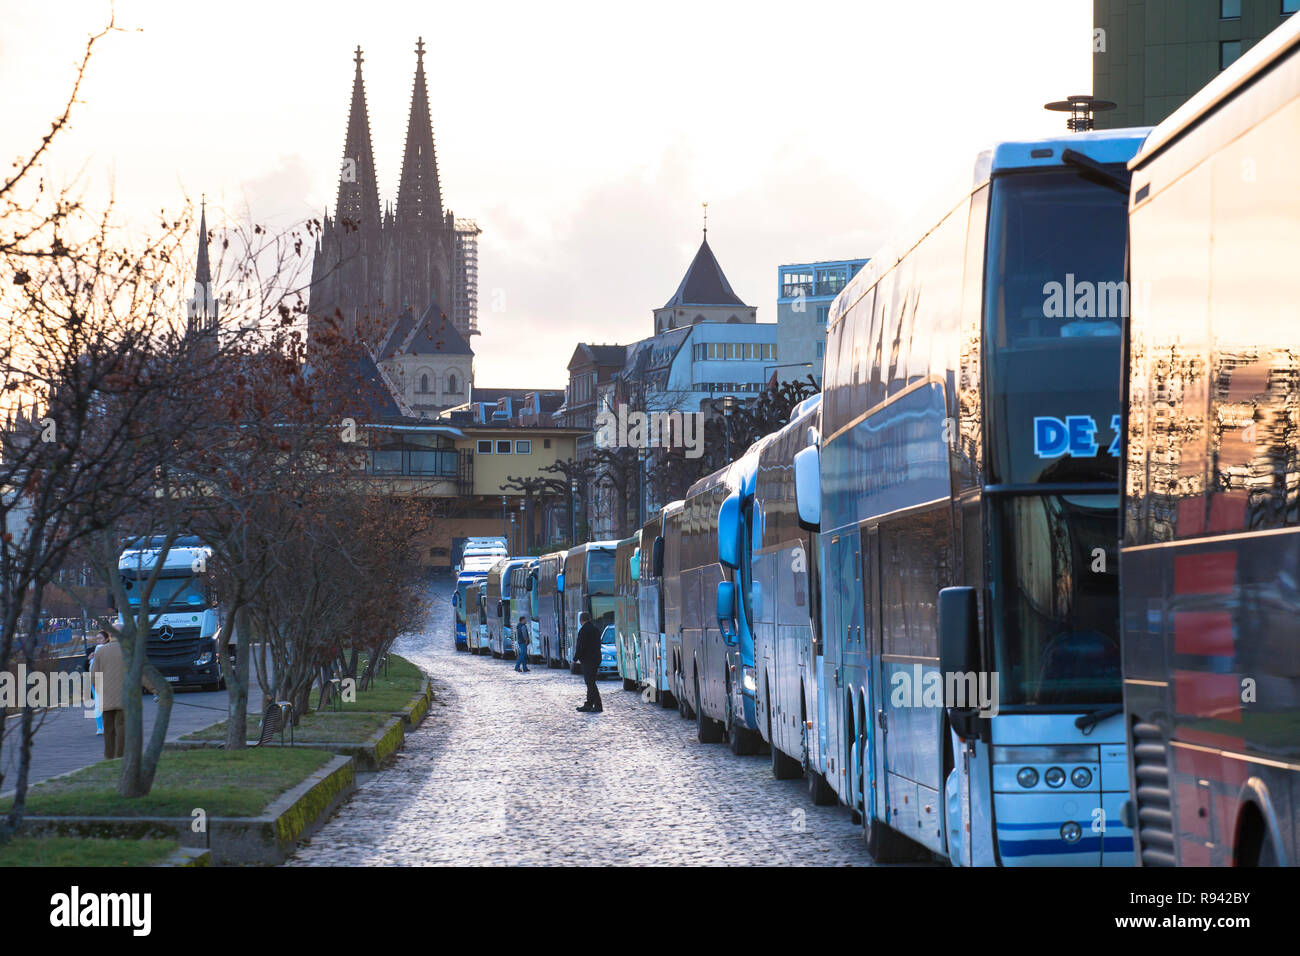 coaches park in long rows at the street Konrad-Adenauer-Ufer on the river Rhine, the cathedral, Cologne, Germany.  Reisebusse parken in langen Schlang Stock Photo